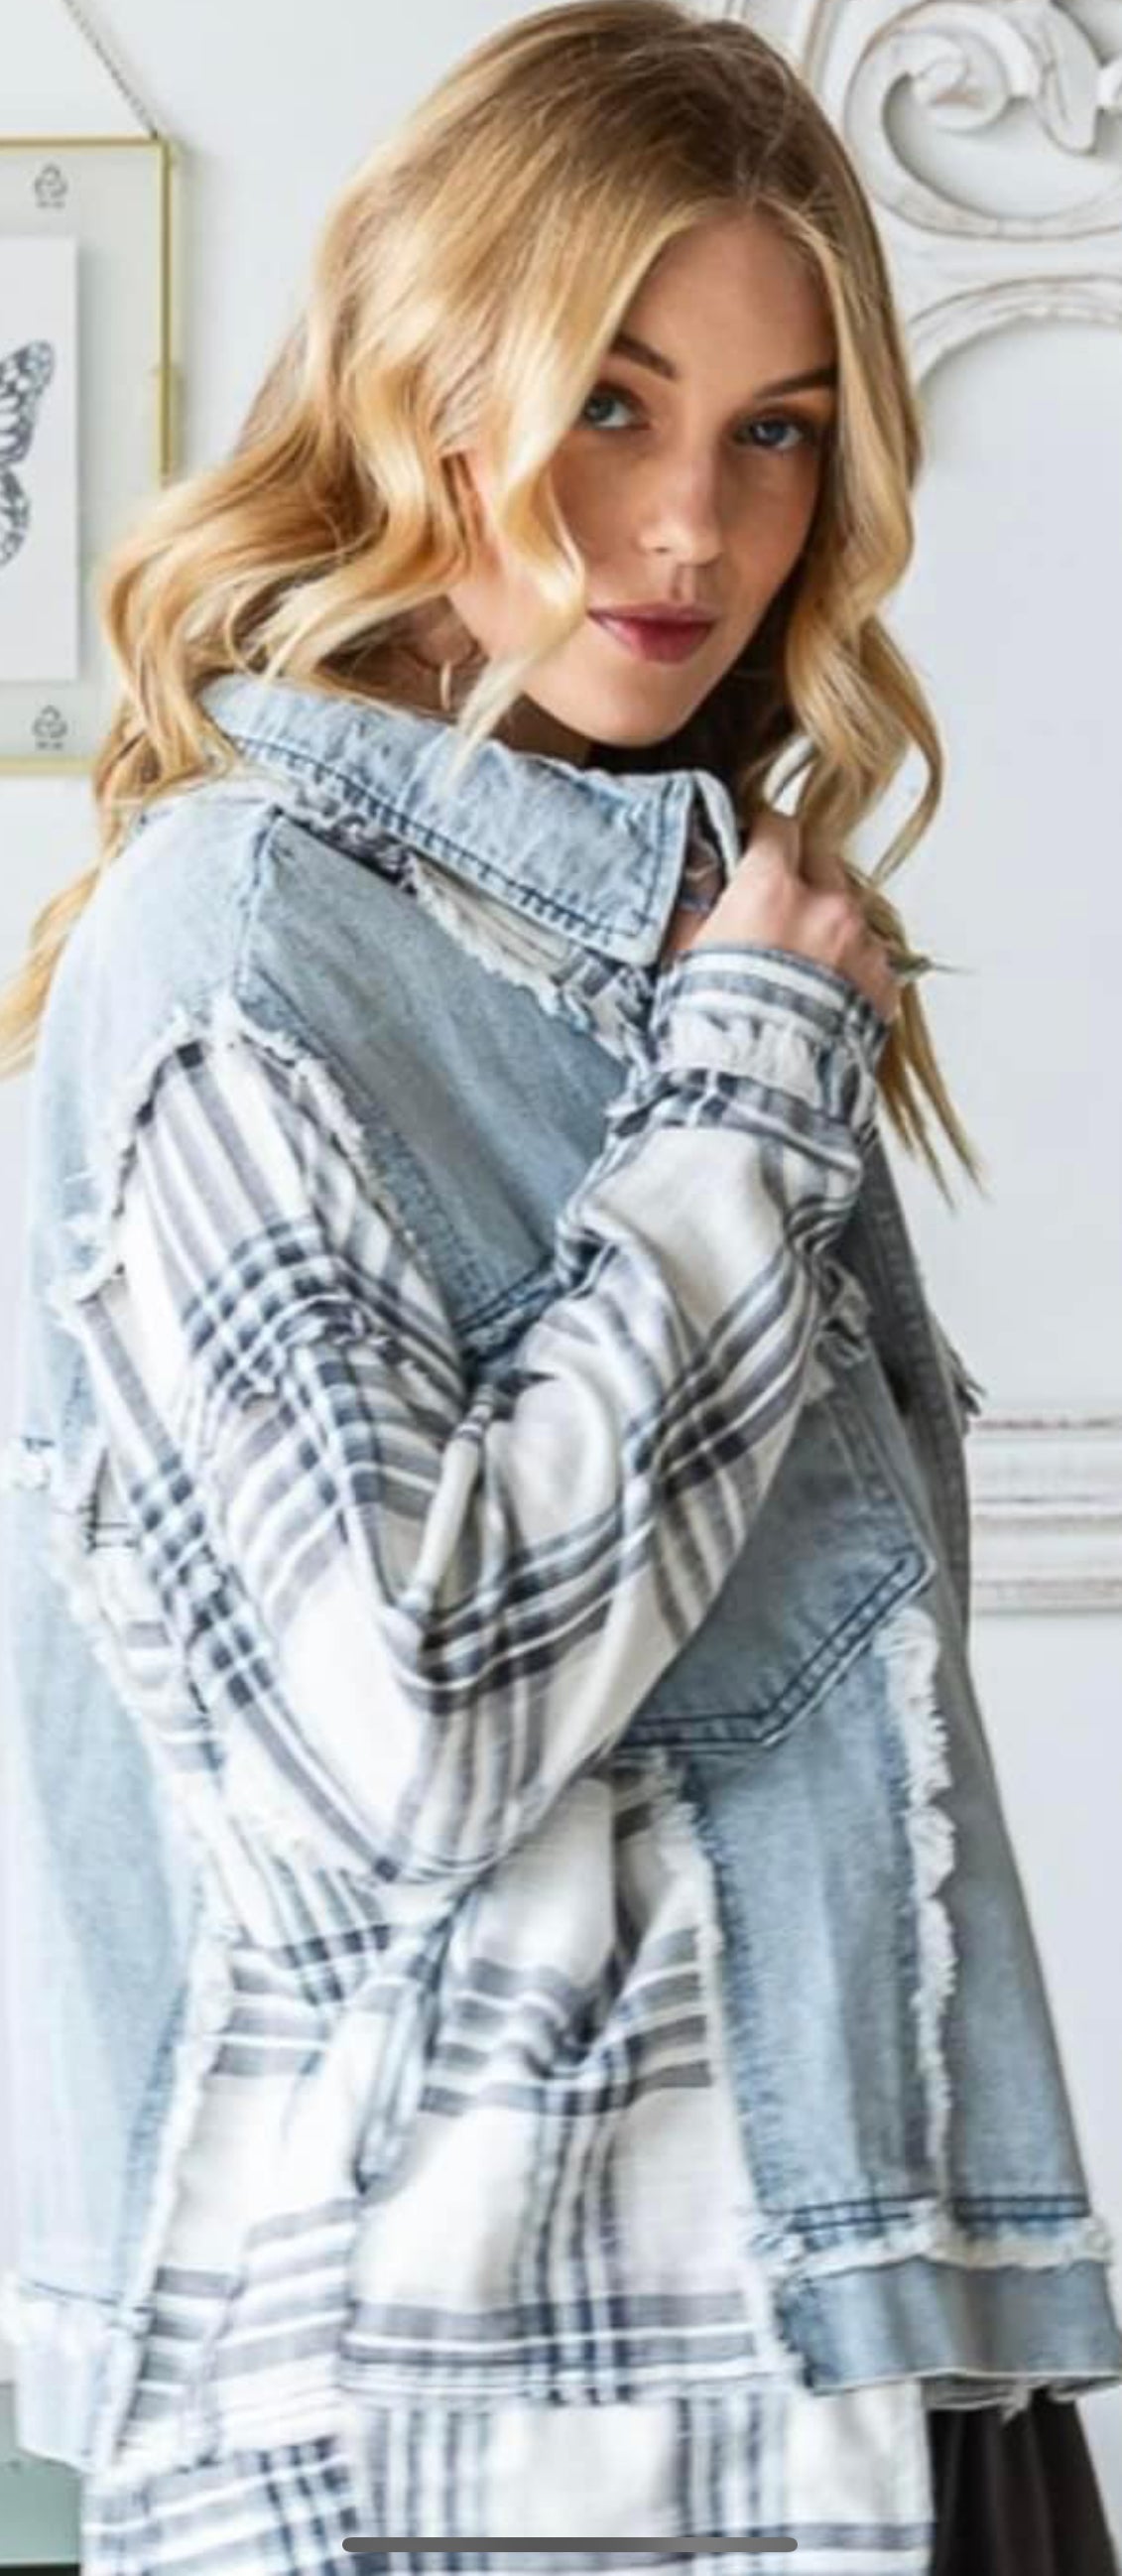 Loose fit snap front denim jacket with white and black plaid sleeves, up to 1X/2X